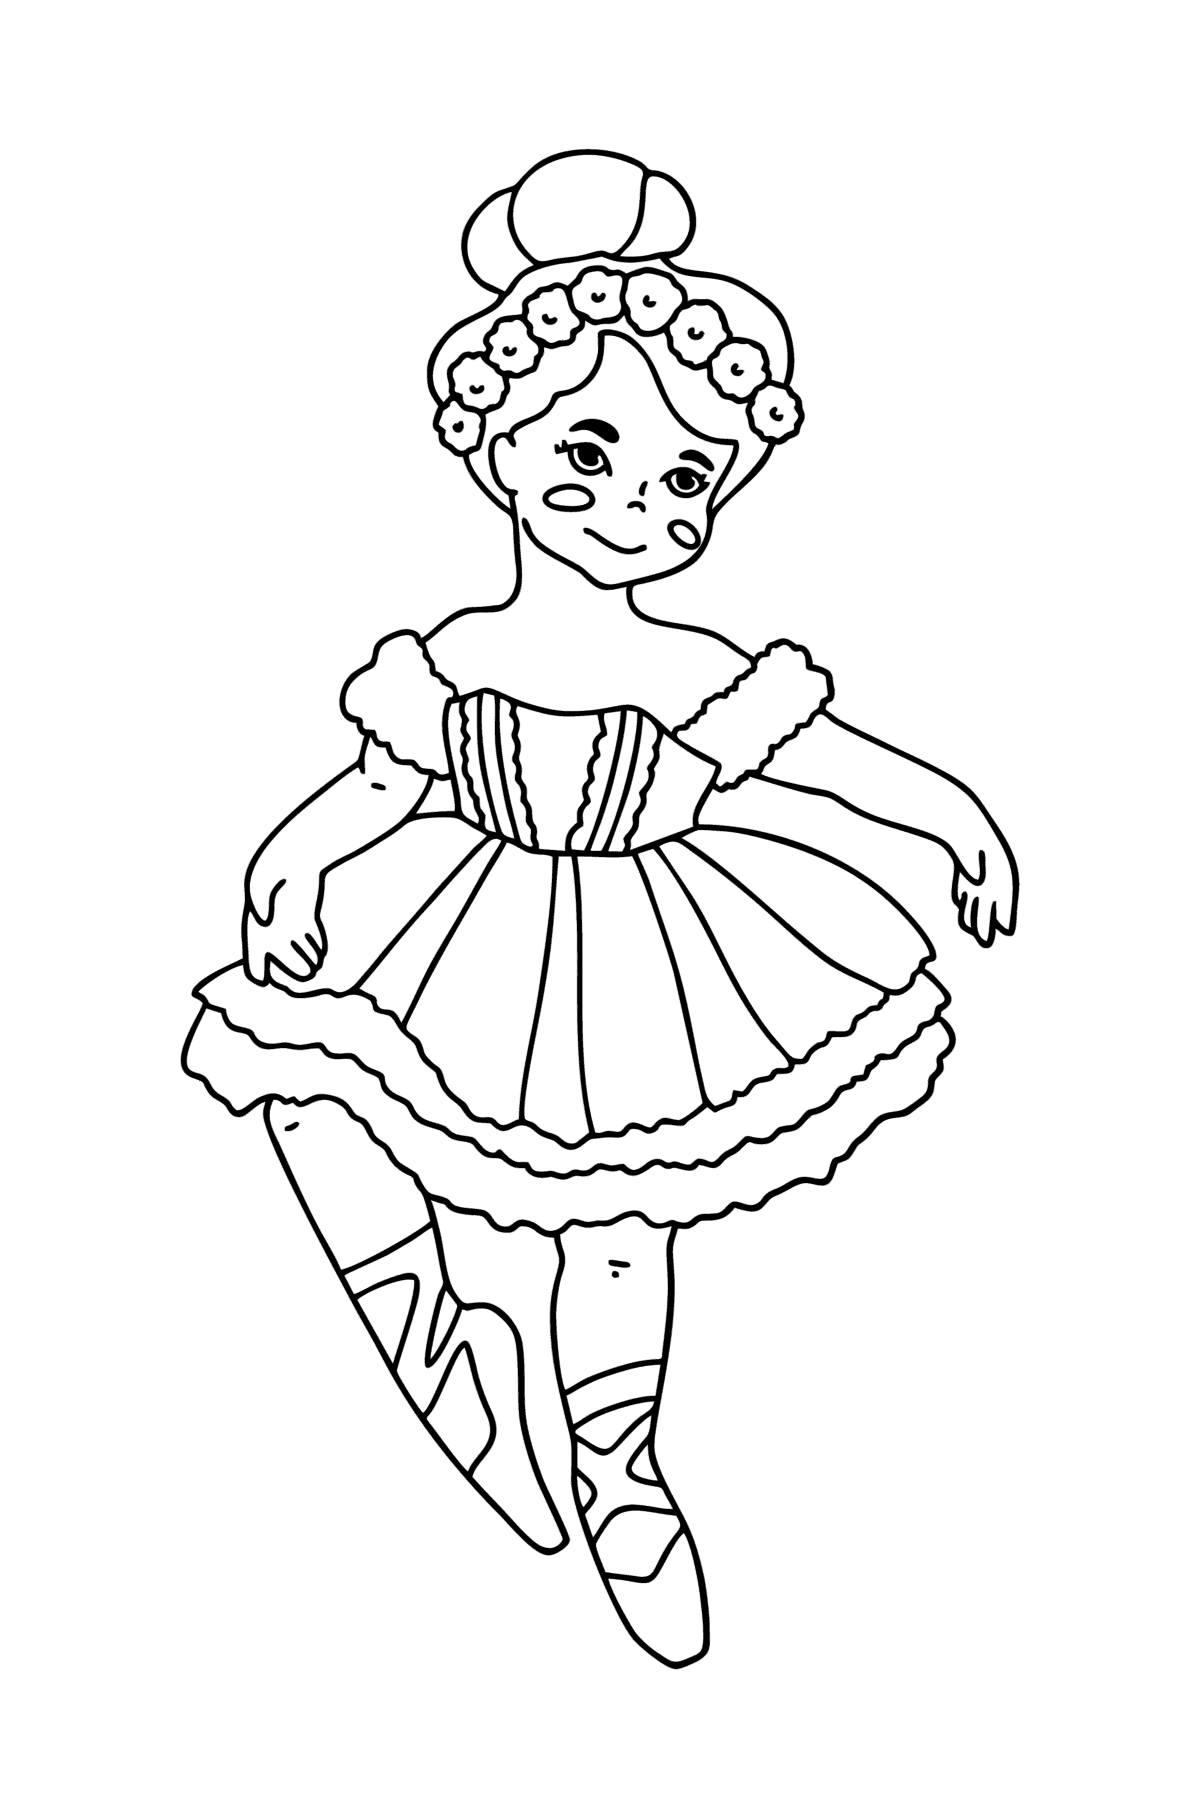 Ballerina girl сoloring page - Coloring Pages for Kids